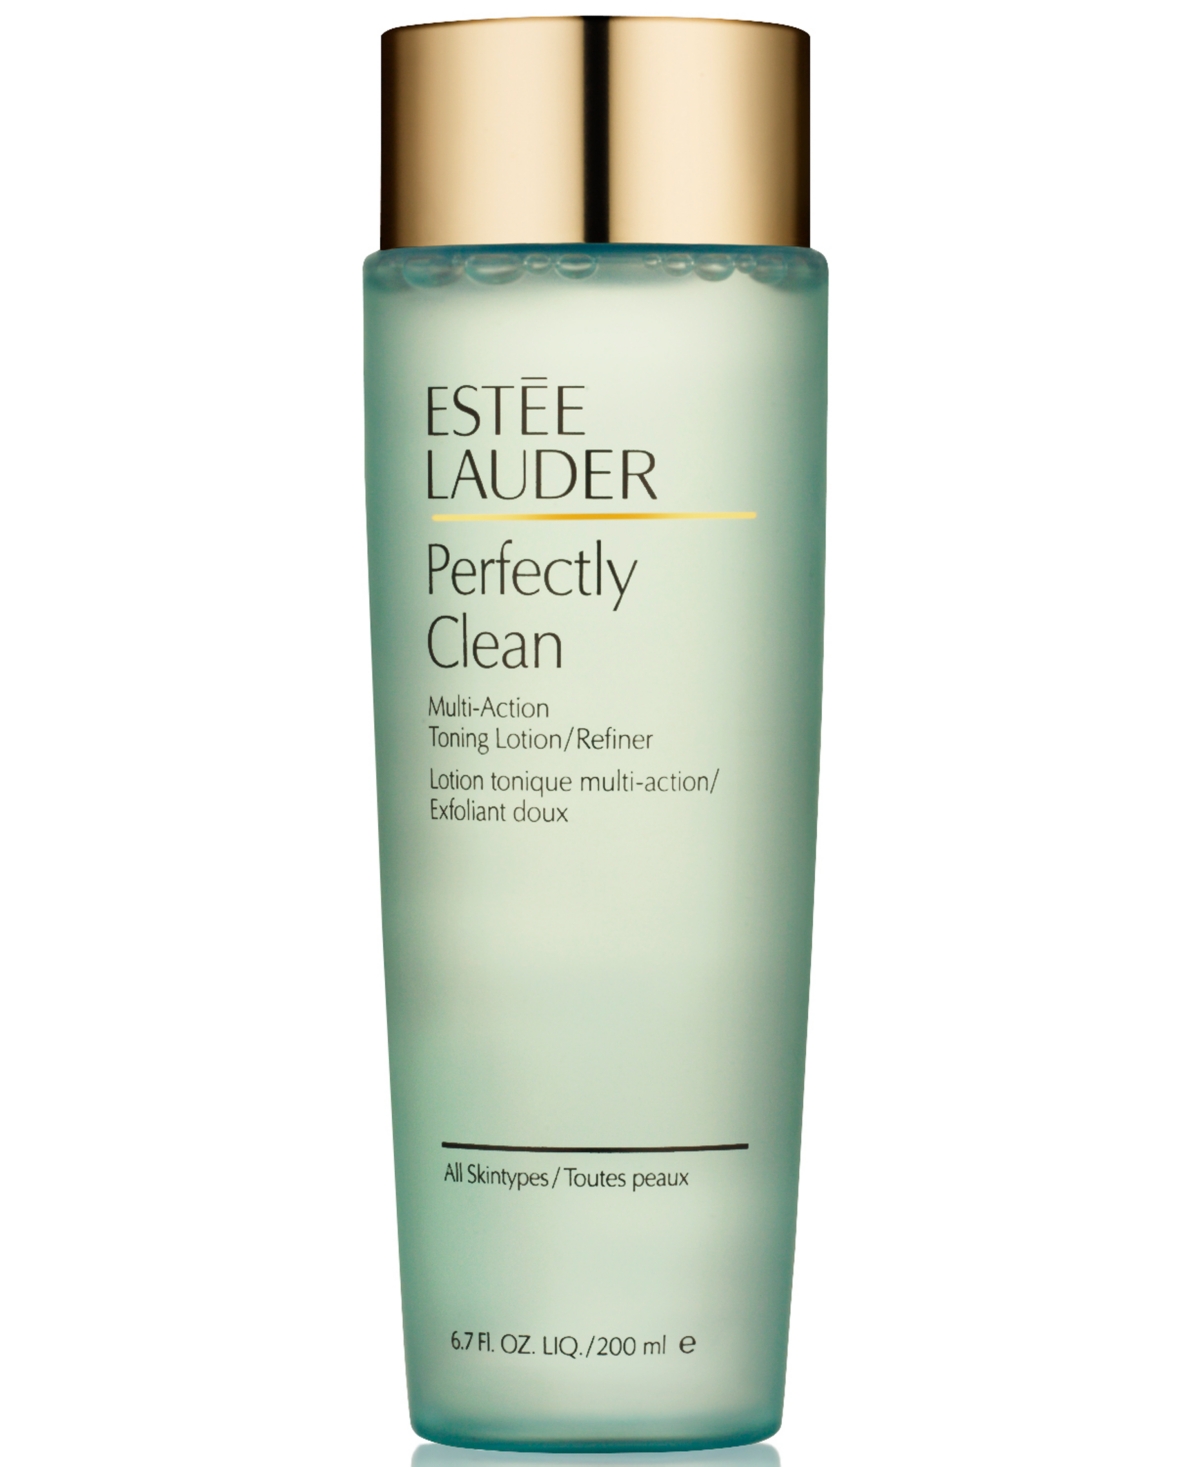 Perfectly Clean Multi-Action Exfoliating Toner, 6.7 oz.